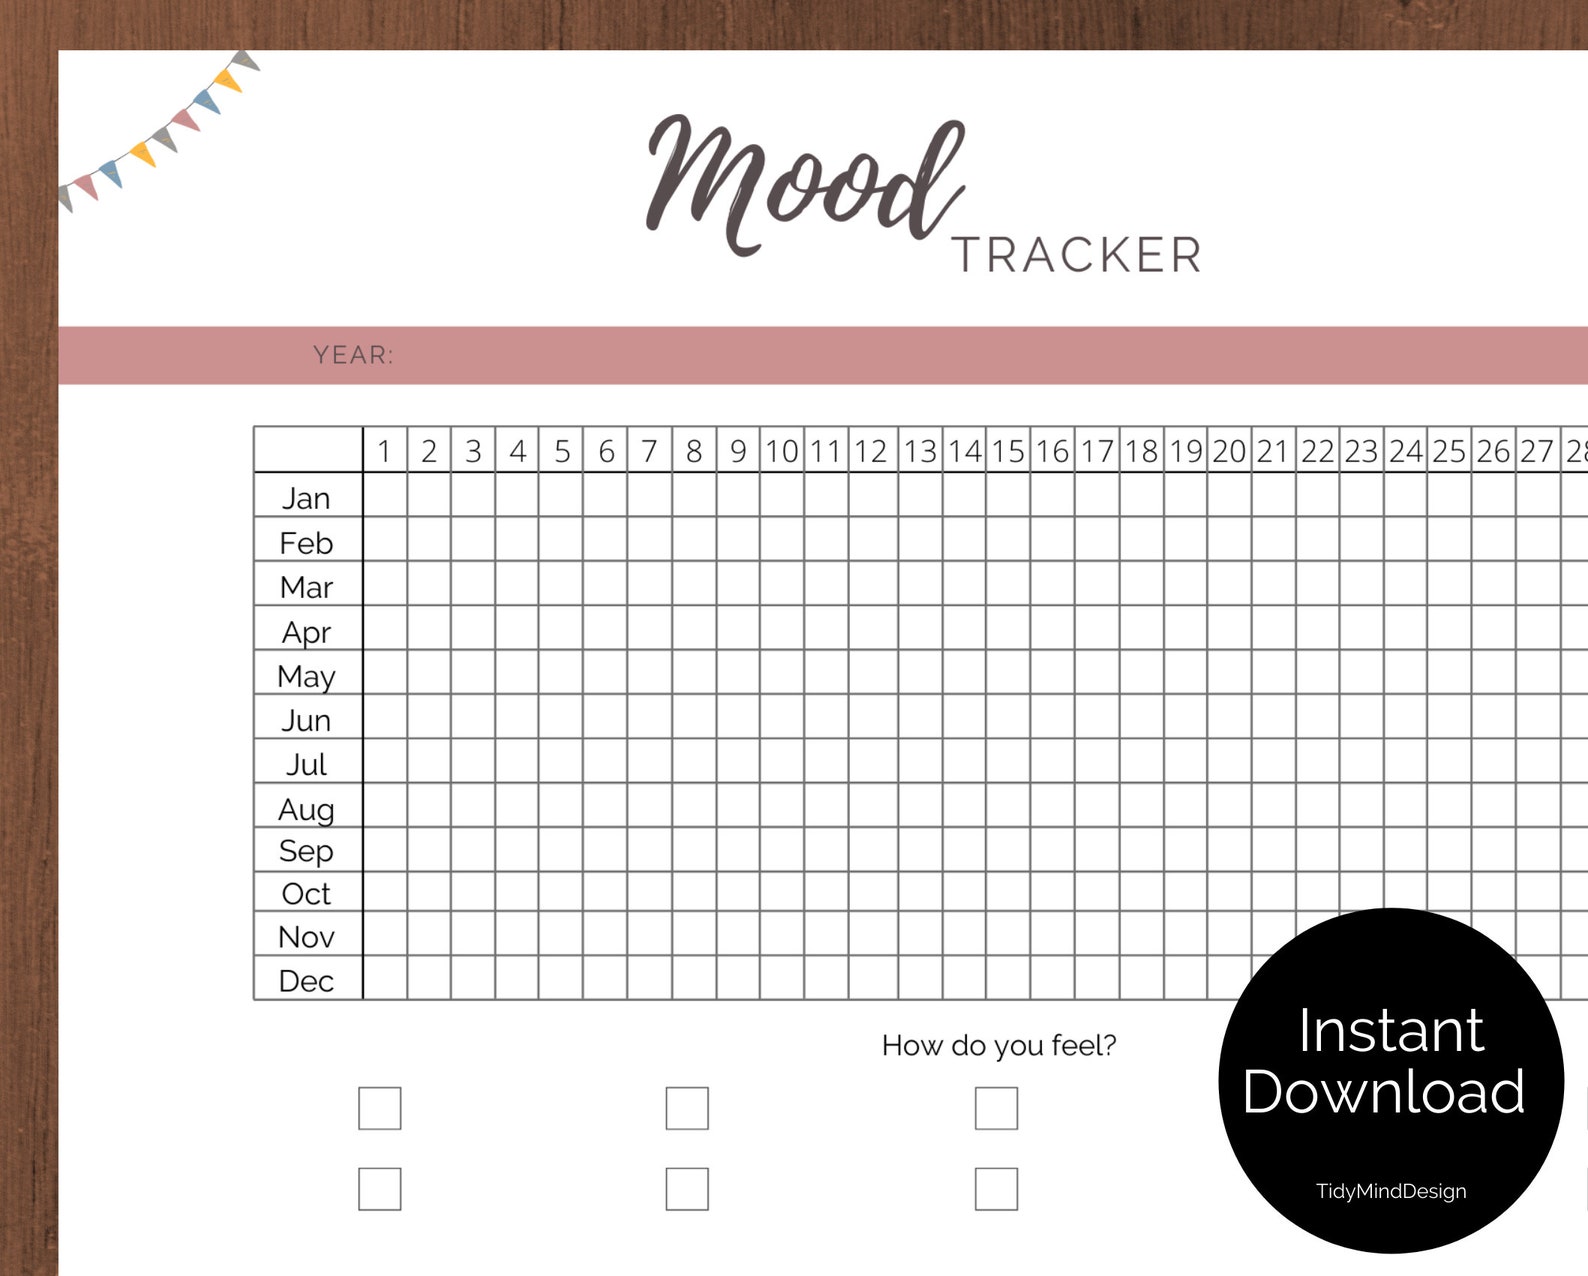 Yearly Mood Tracker Printable Emotion Log Monthly - Etsy